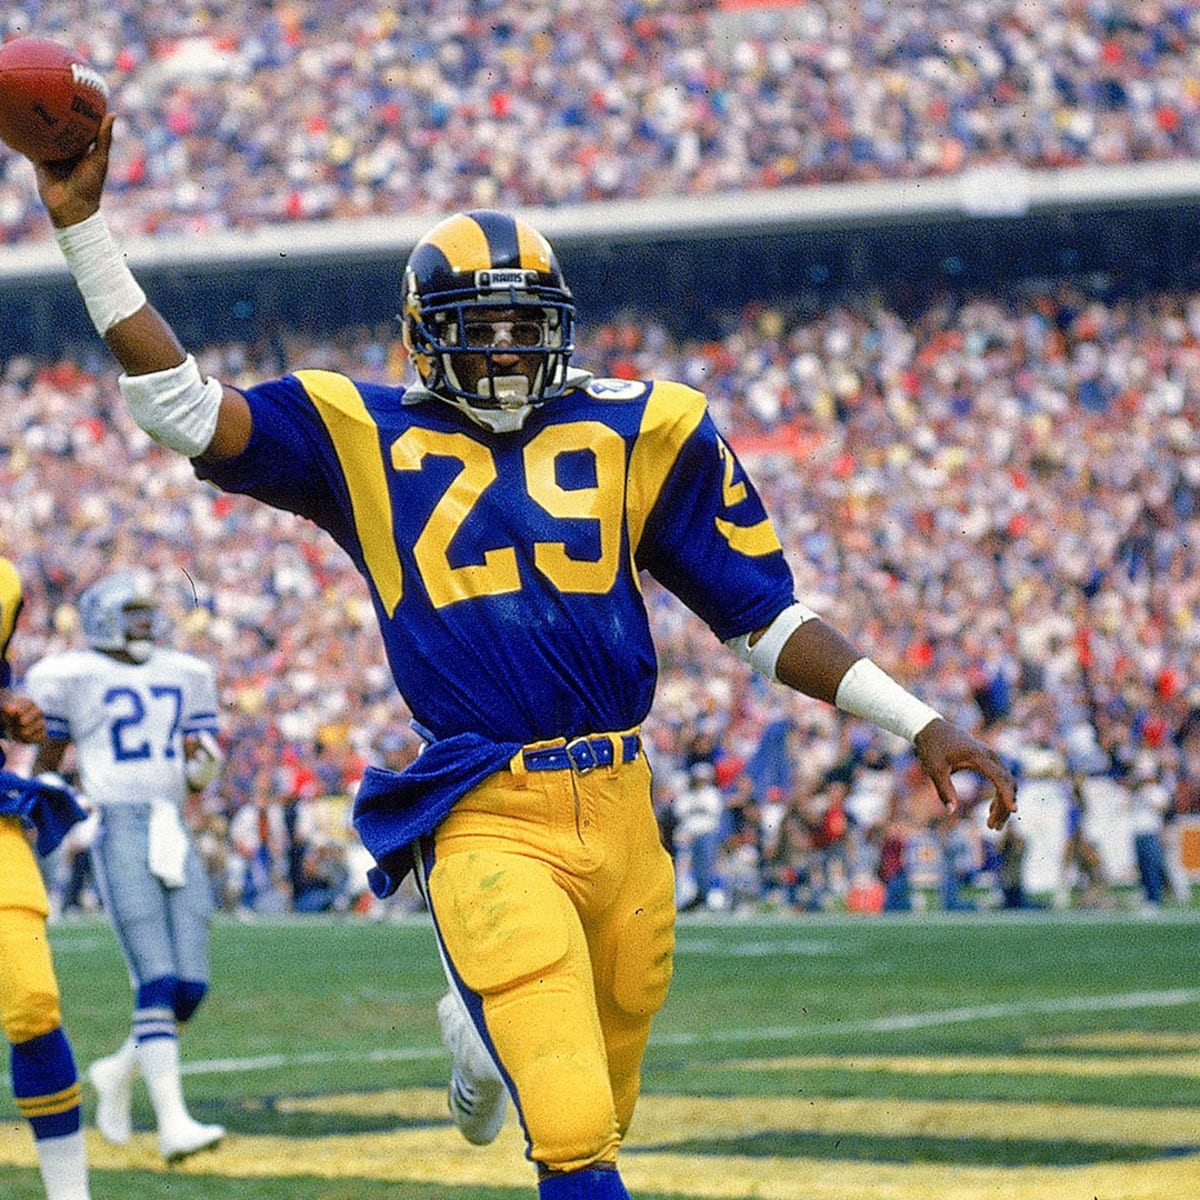 Making the case for those old school Rams uniforms